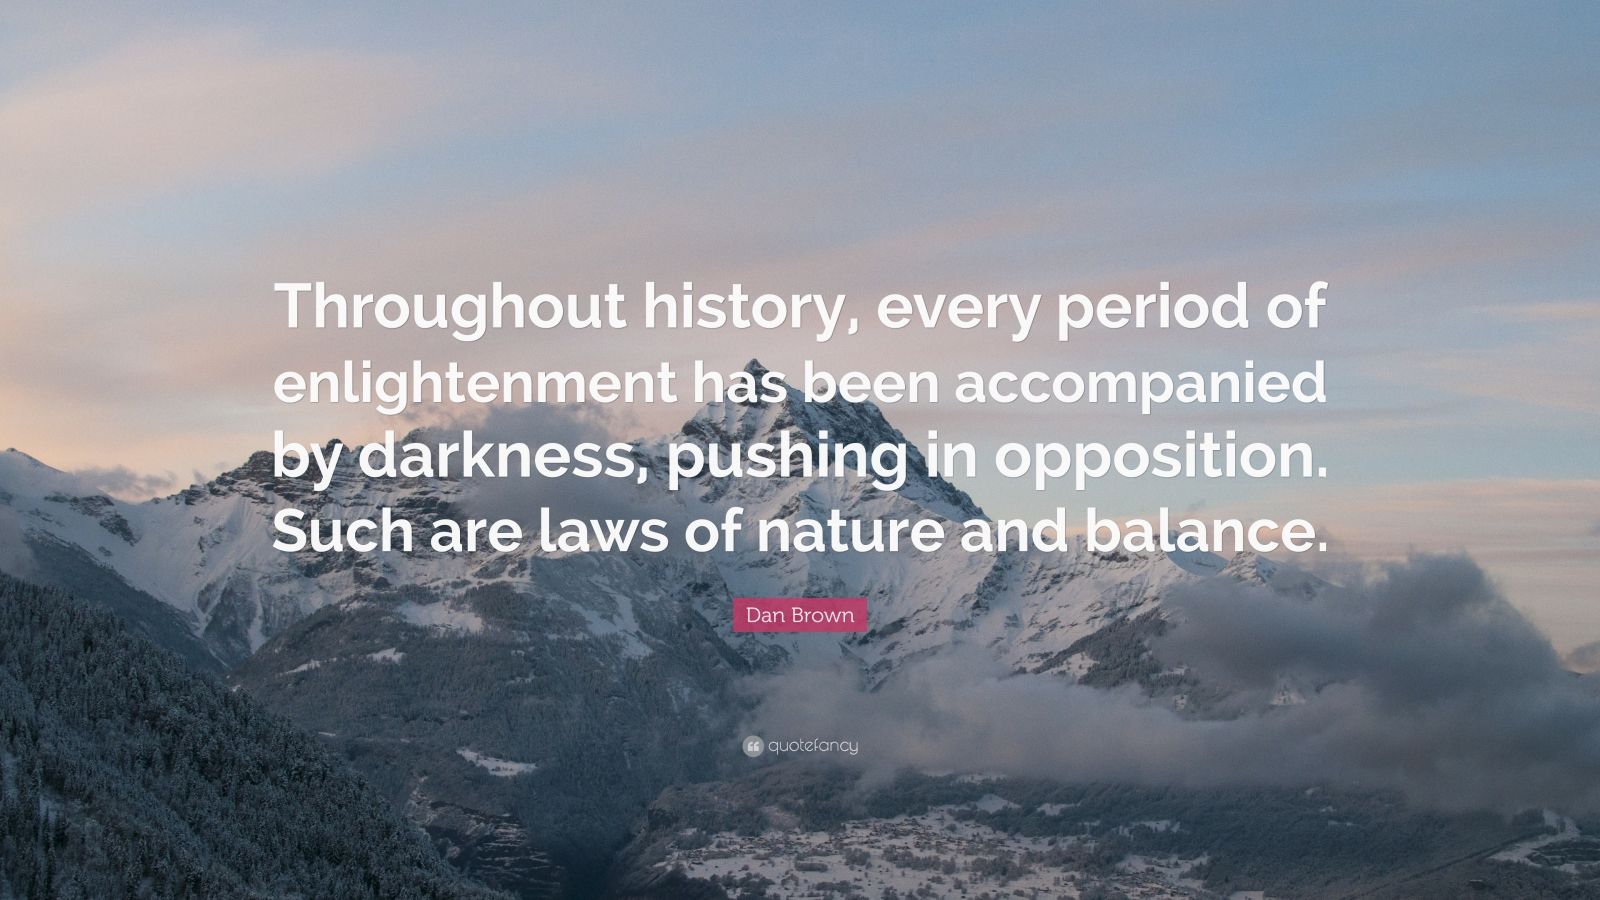 Dan Brown Quote: “Throughout history, every period of enlightenment has ...